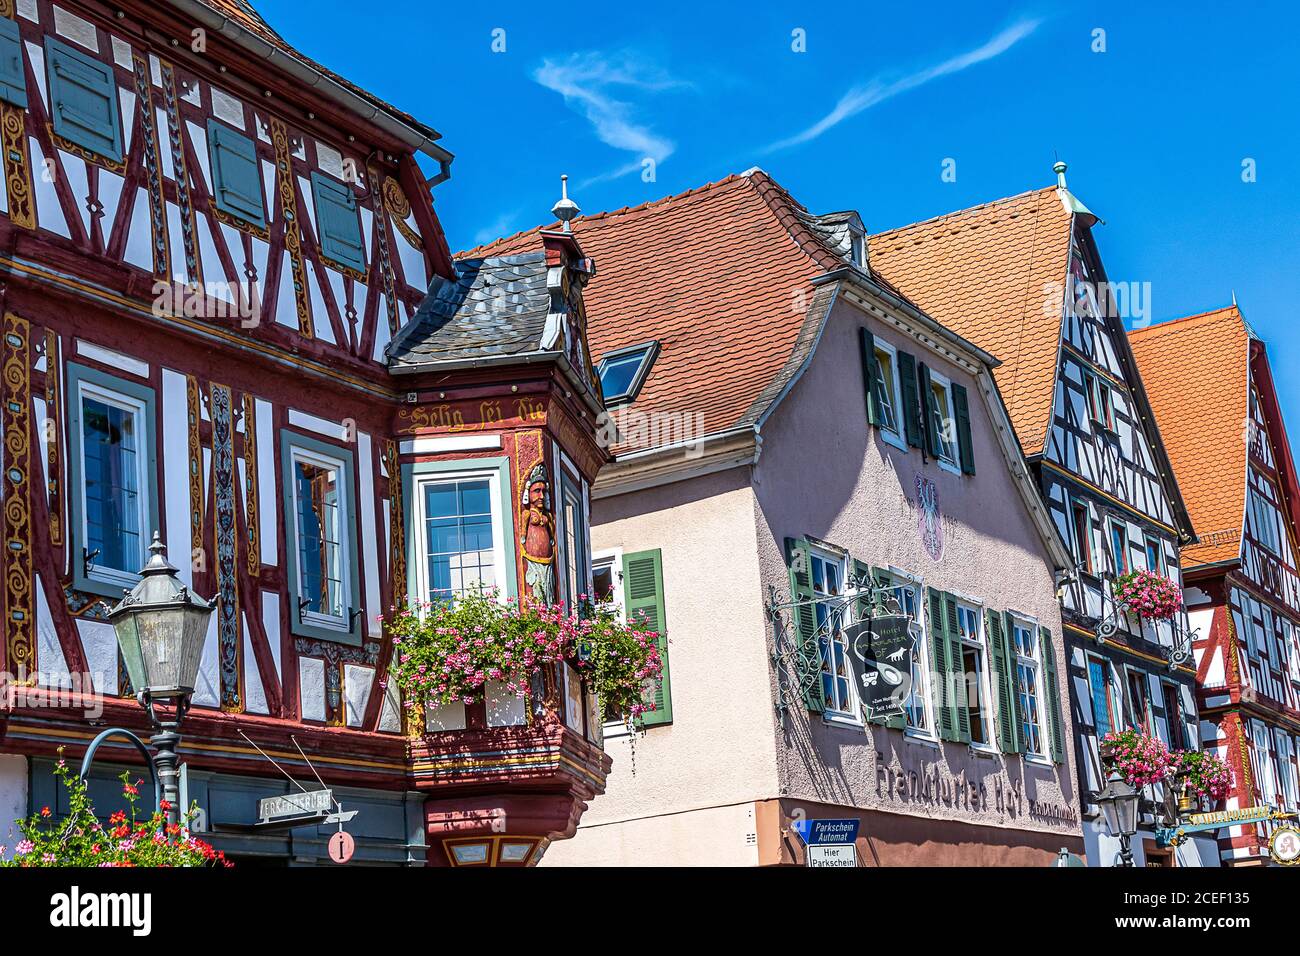 Picturesque half-timbered historic houses in Seligenstadt on the banks of the Main, Germany. The town was of great importance in Carolingian times. Stock Photo